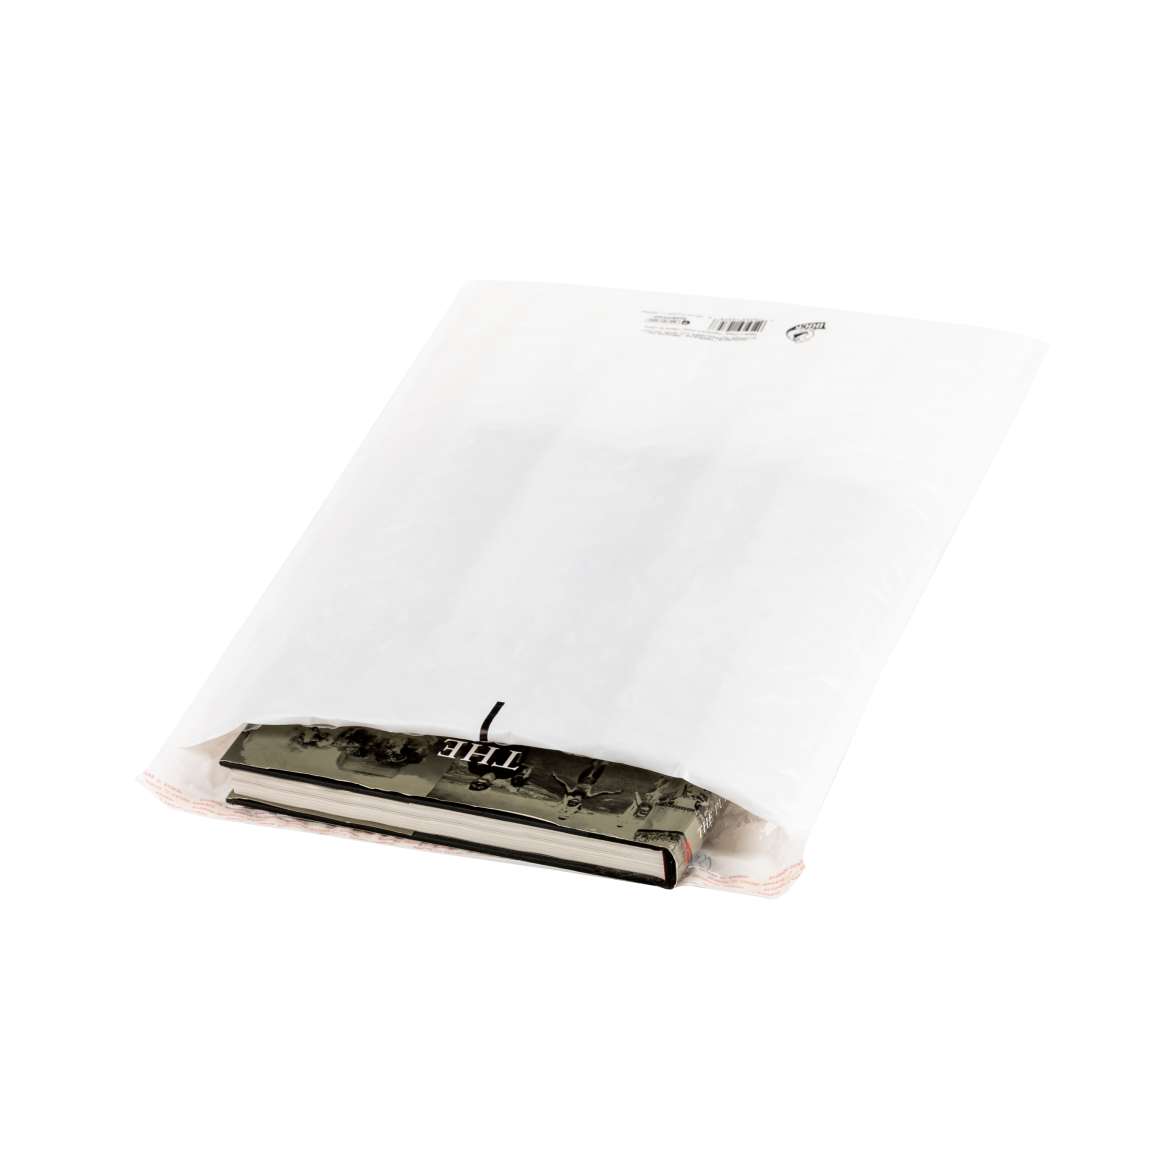 Duck® Brand Poly Big Bubble Mailers